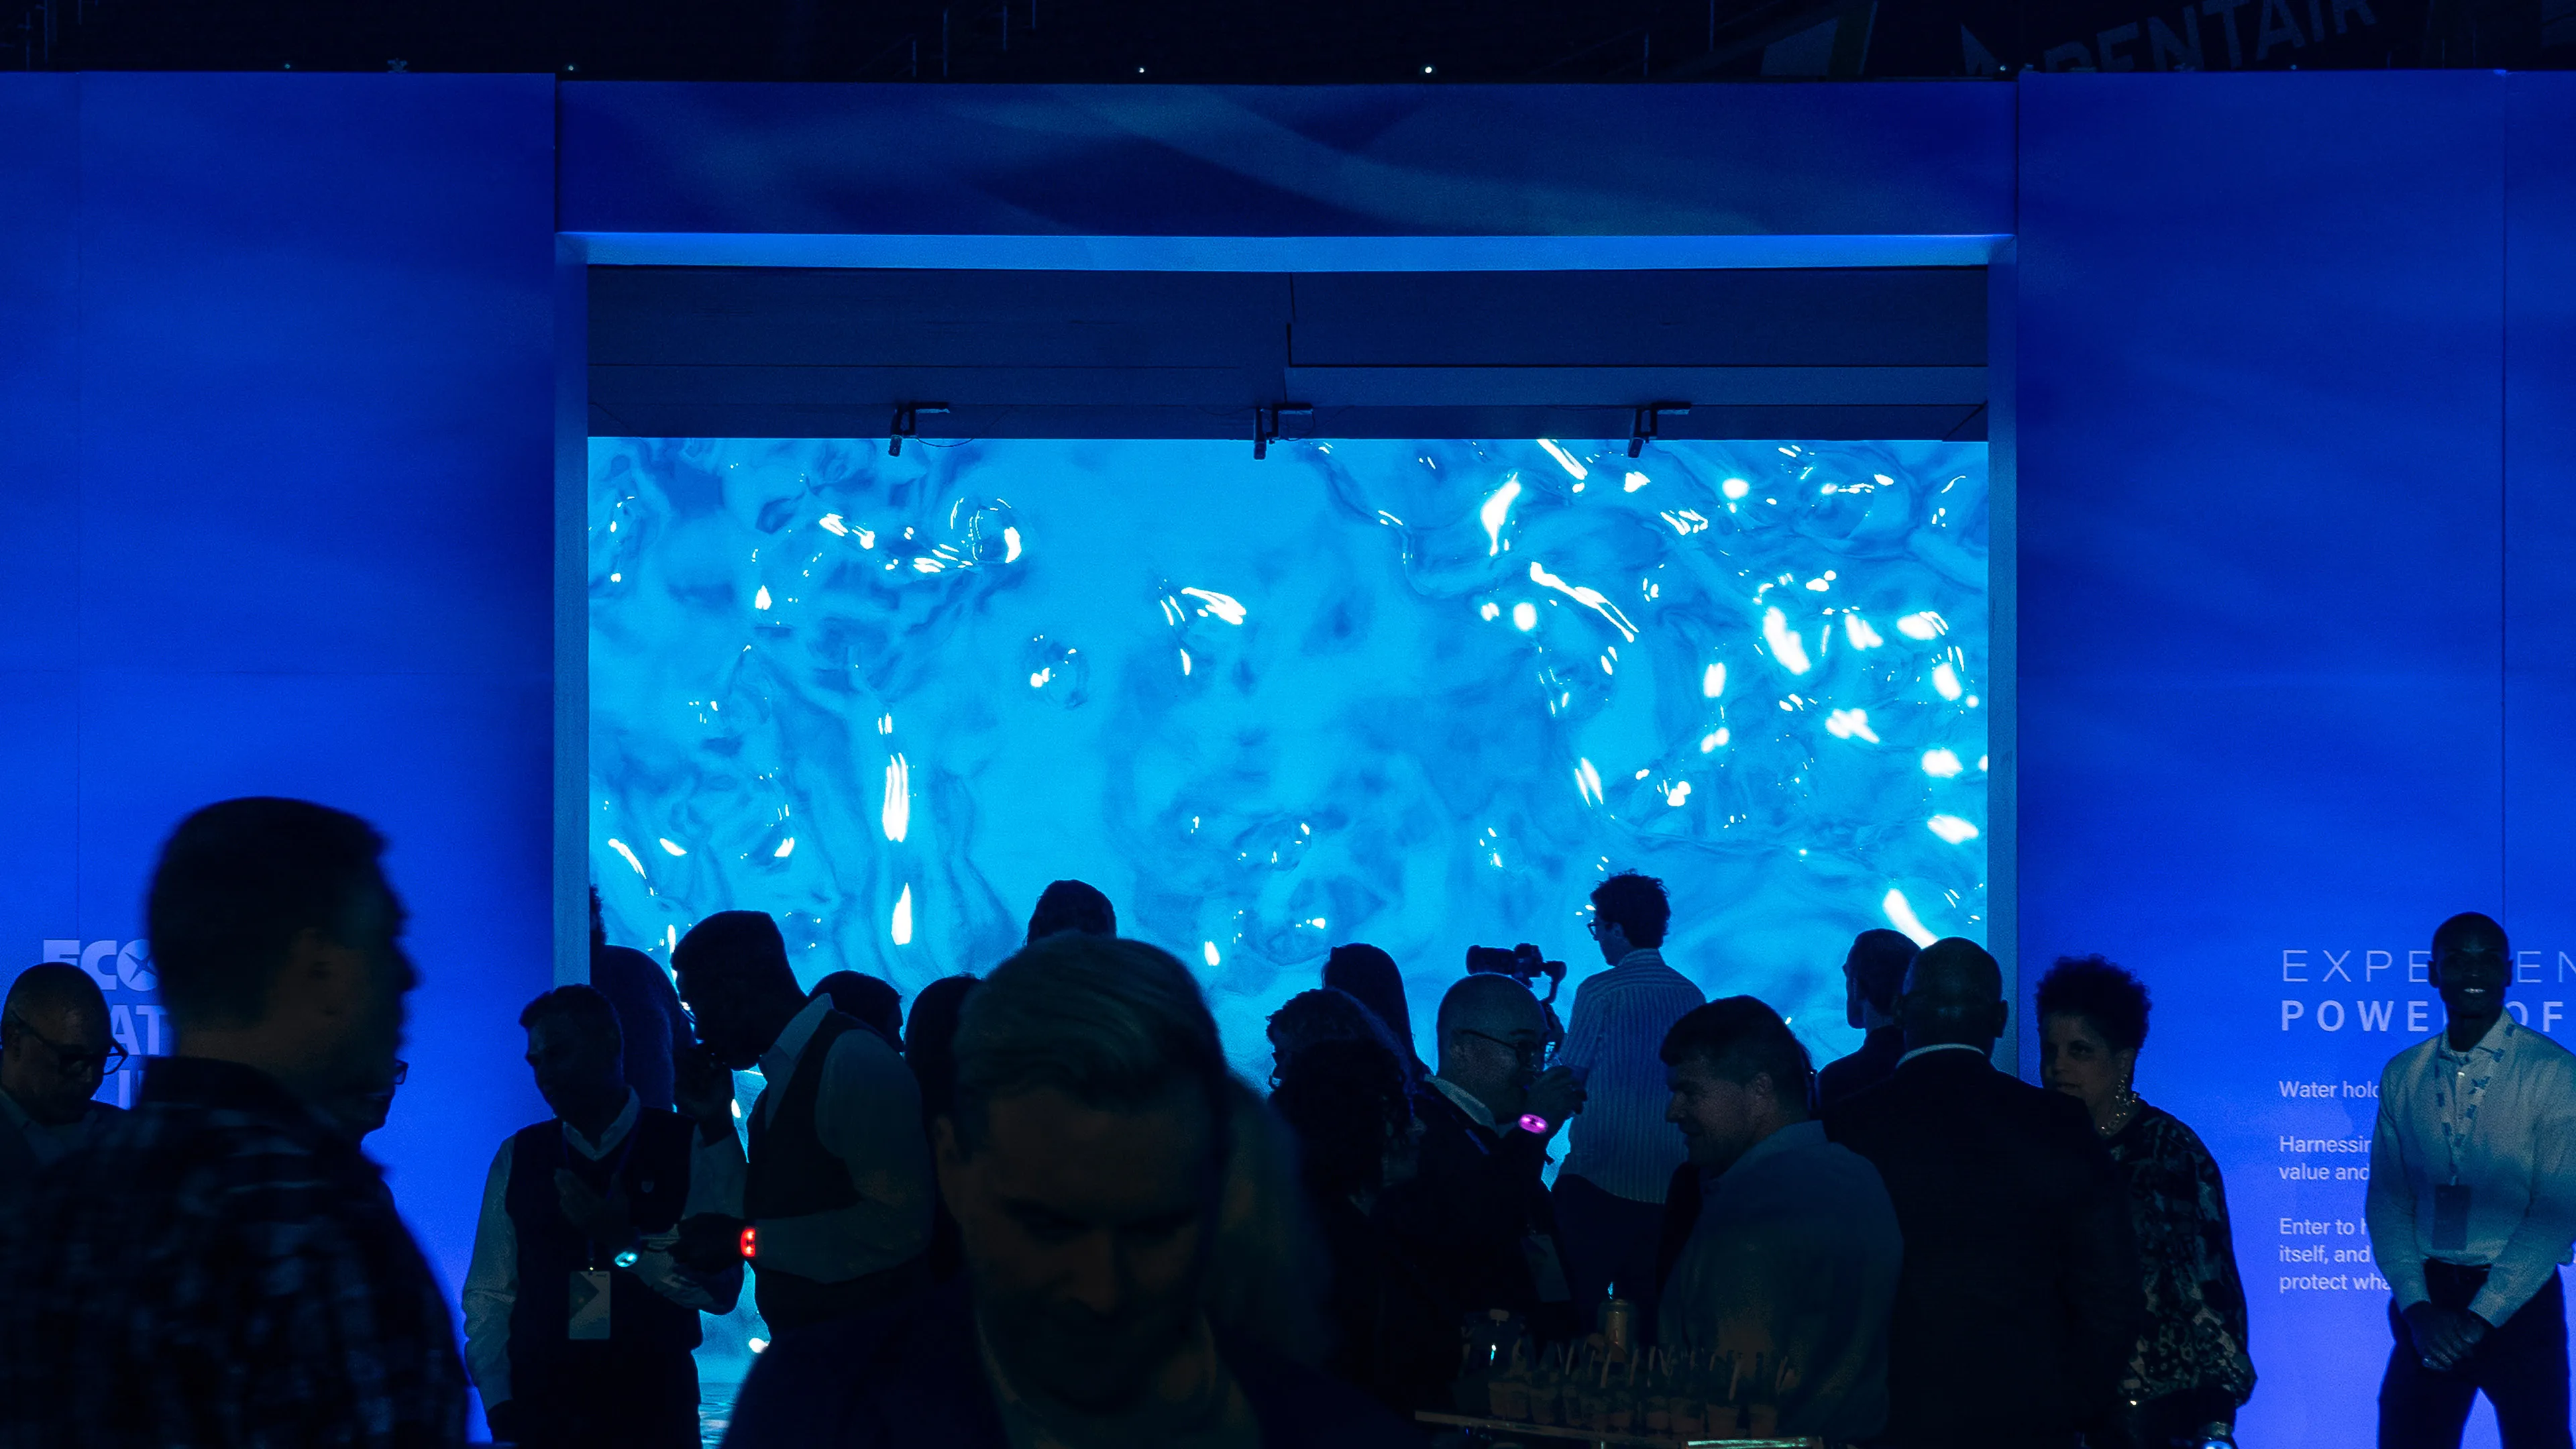 A crowded entrance way into an interactive installation. The installation features dynamic water fluid simulations